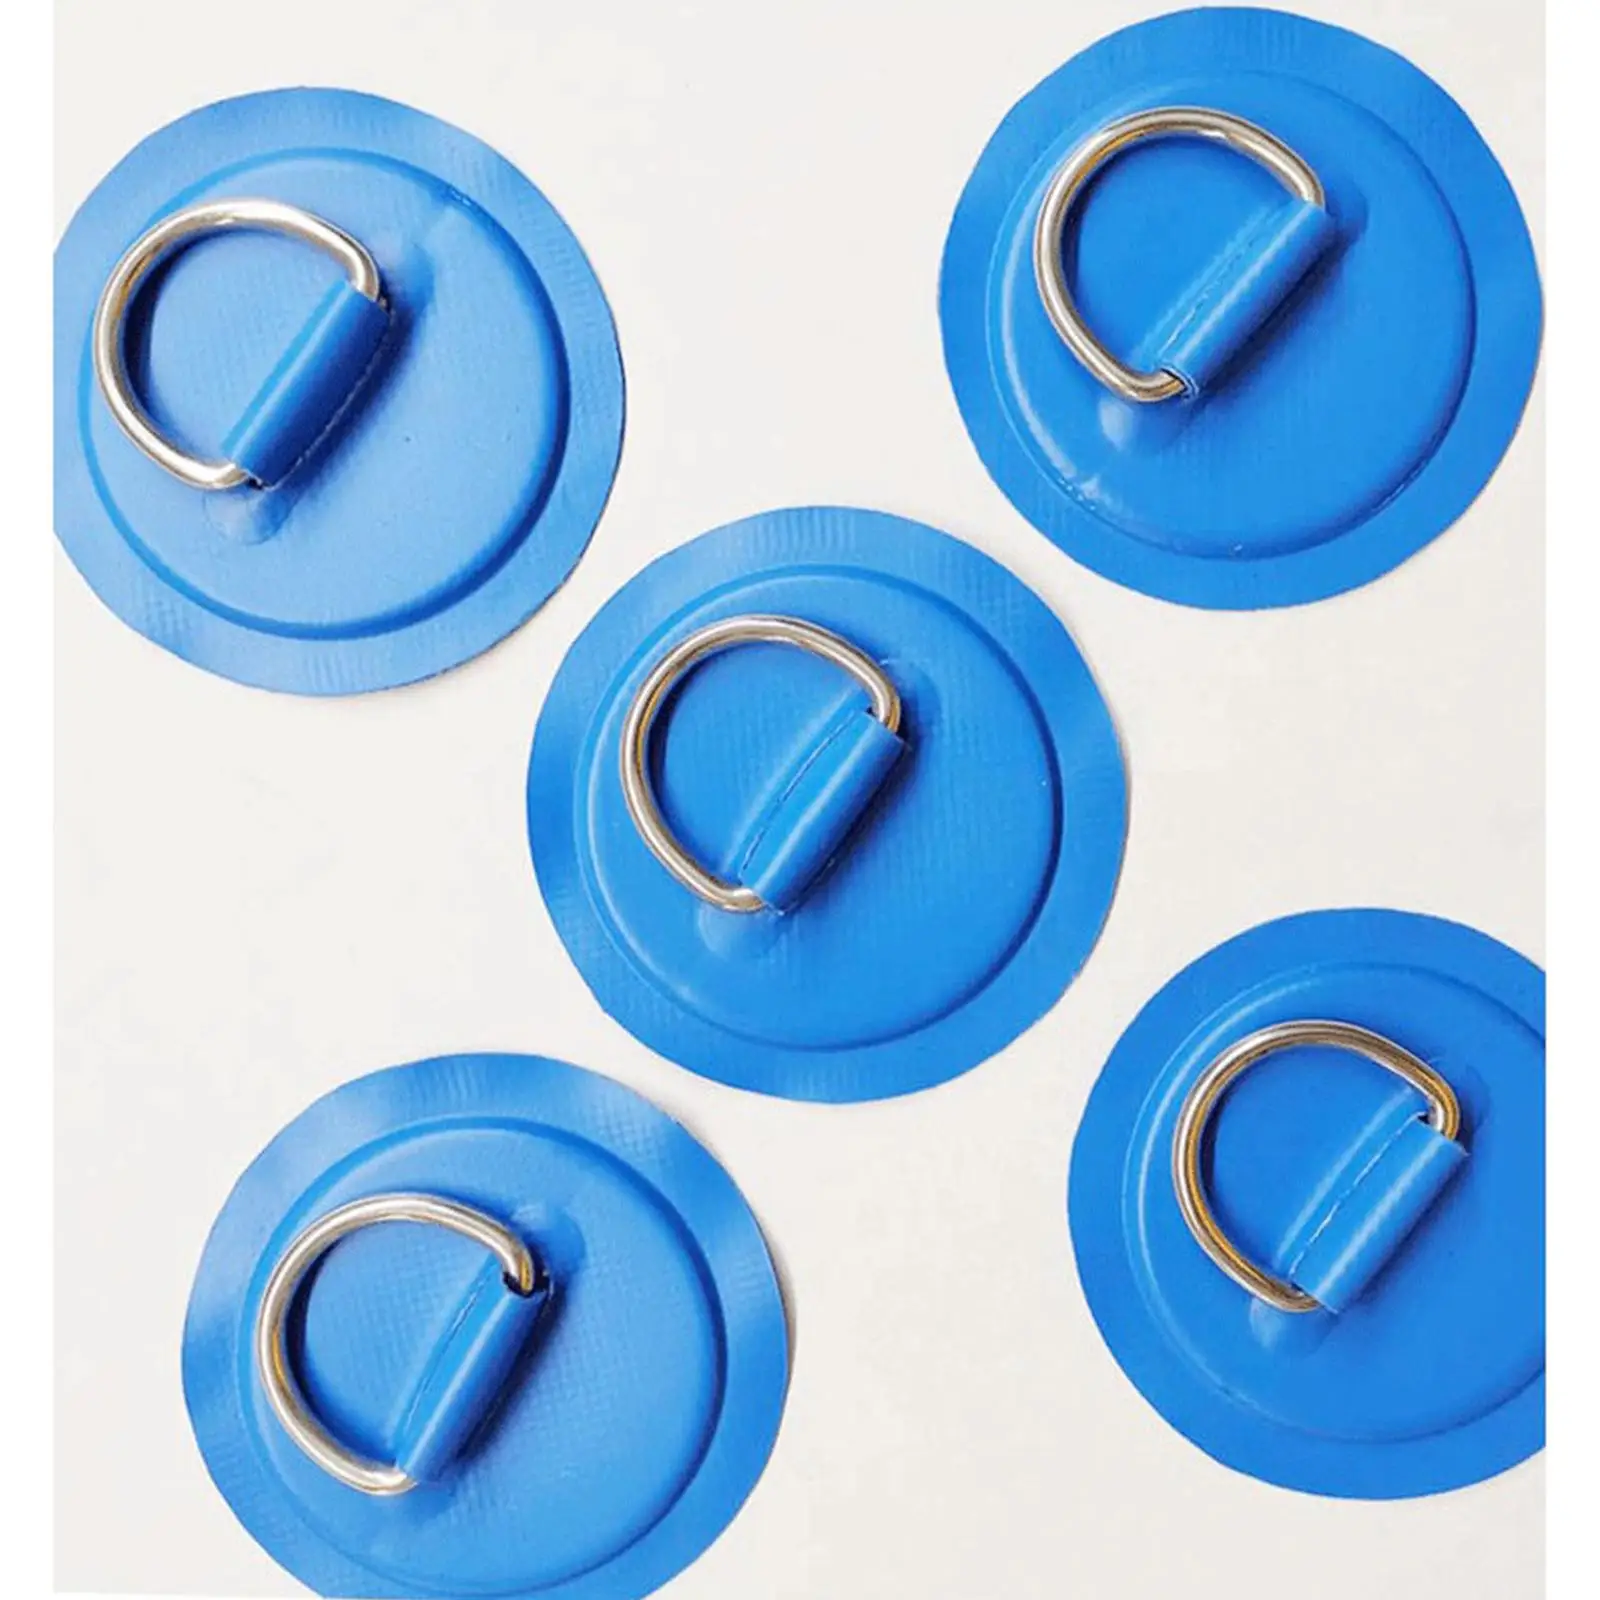 Bungee Deck Kit D Rings Pad Patch for Kayak Canoe Inflatable Boat Fishing Hook Deck Rigging Kit Raft Deck Accessories